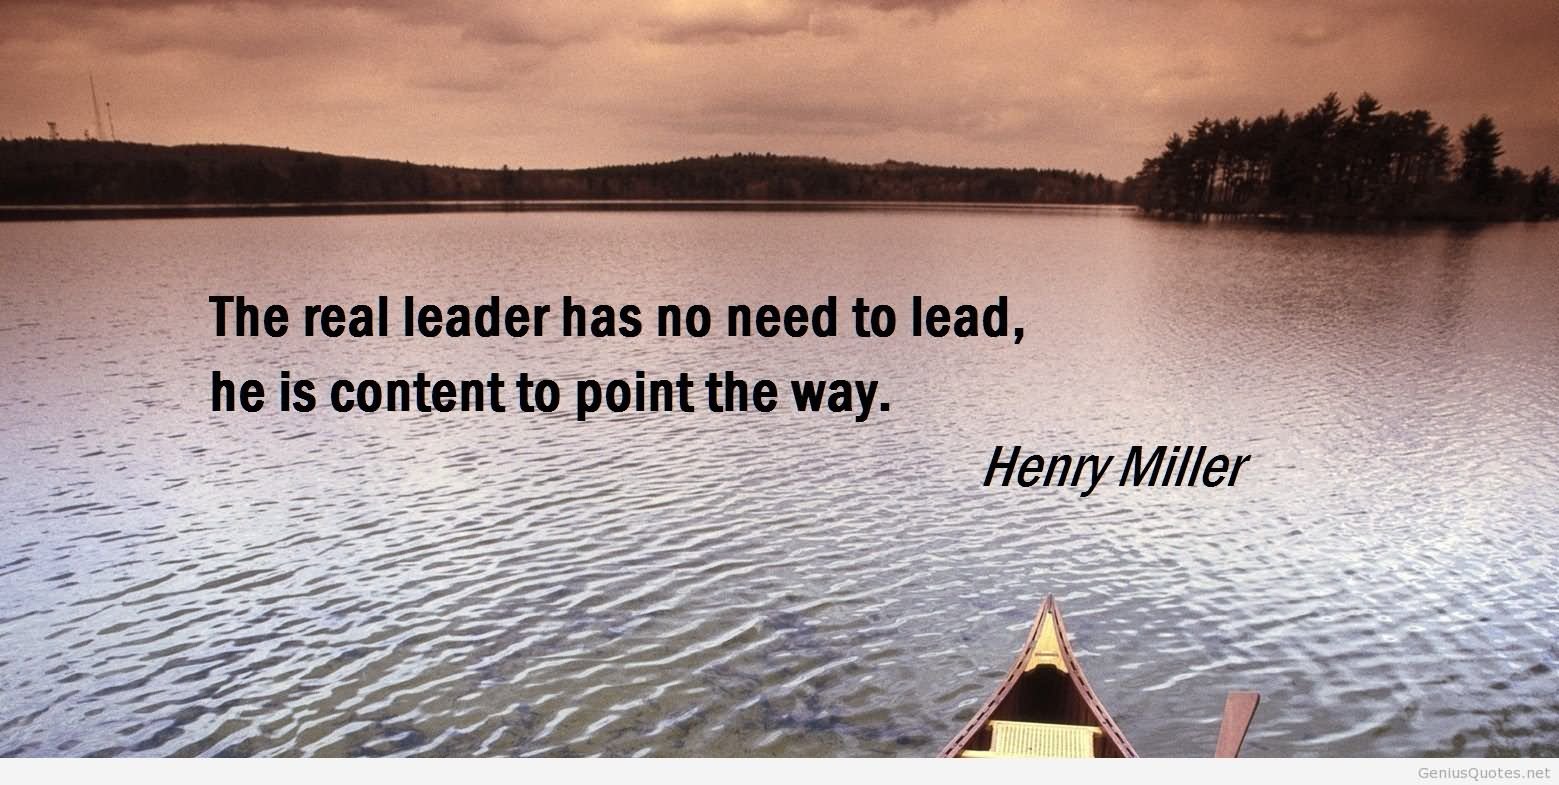 The real leader has no need to lead - he is content to point the way. - Henry Miller